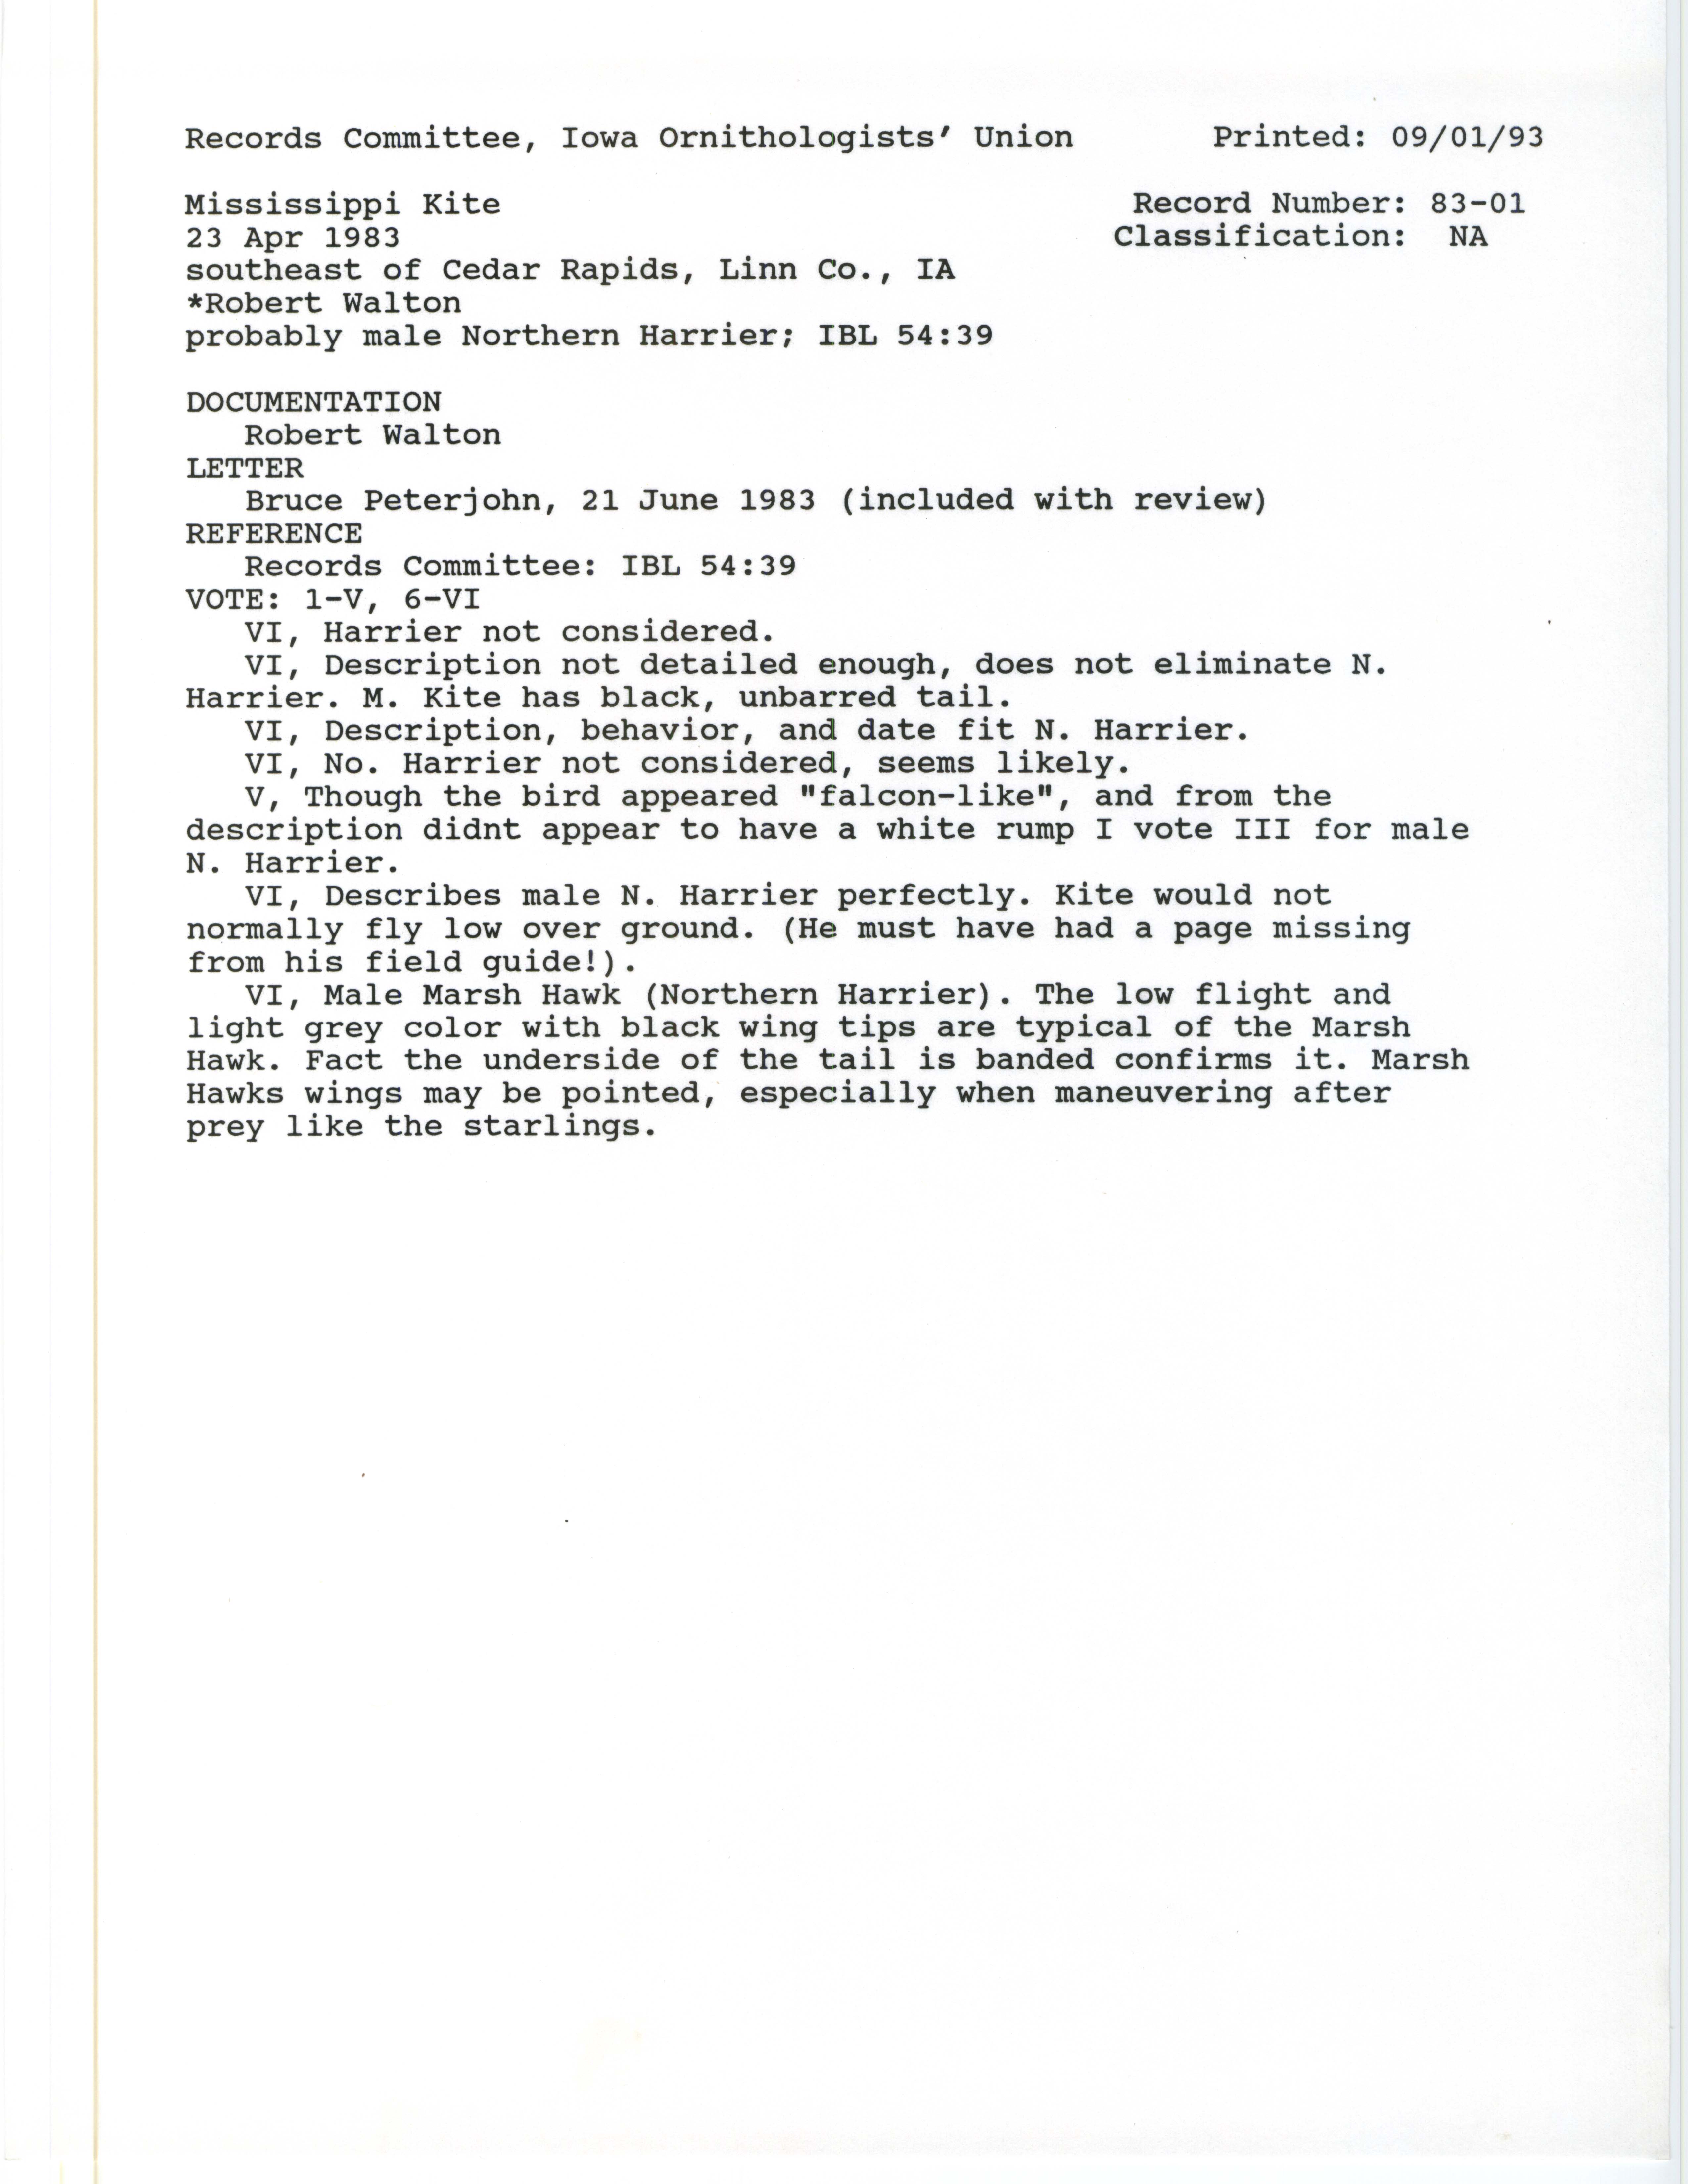 Records Committee review for rare bird sighting of Mississippi Kite at Cedar Rapids, 1983